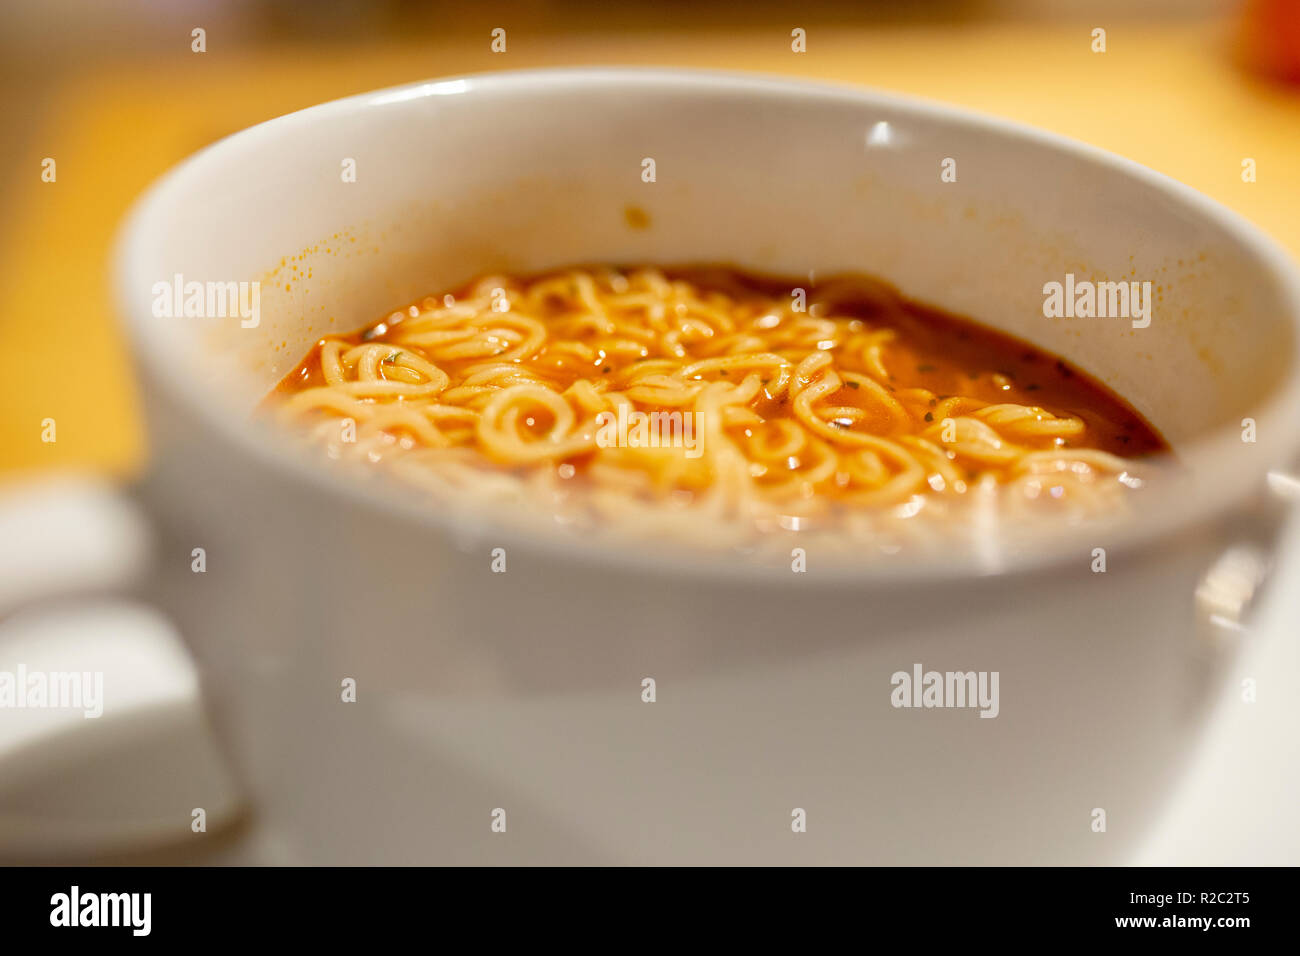 Warme würzige Nudelsuppe closeup mit out of focus Elemente Stockfoto